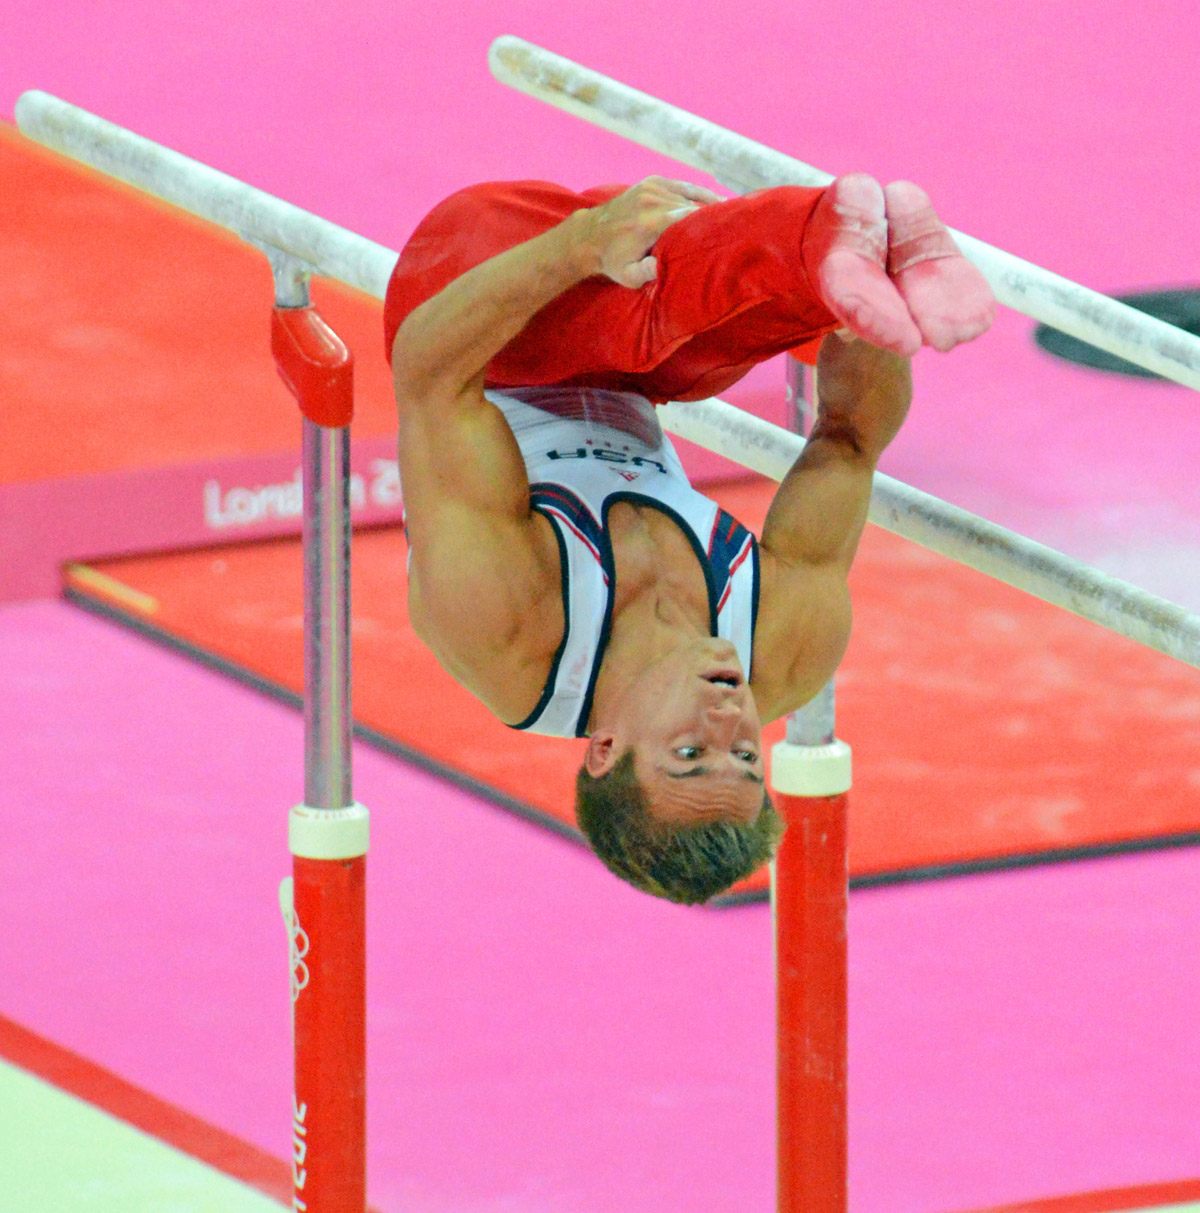 USA gymnist, Samuel Mikulak , dismounts from the parallel bars in the team competition of the London Olympics. The US finished fifth while China, Japan, and Great Britain took the gold, Silver, and Bronze, respectively.(